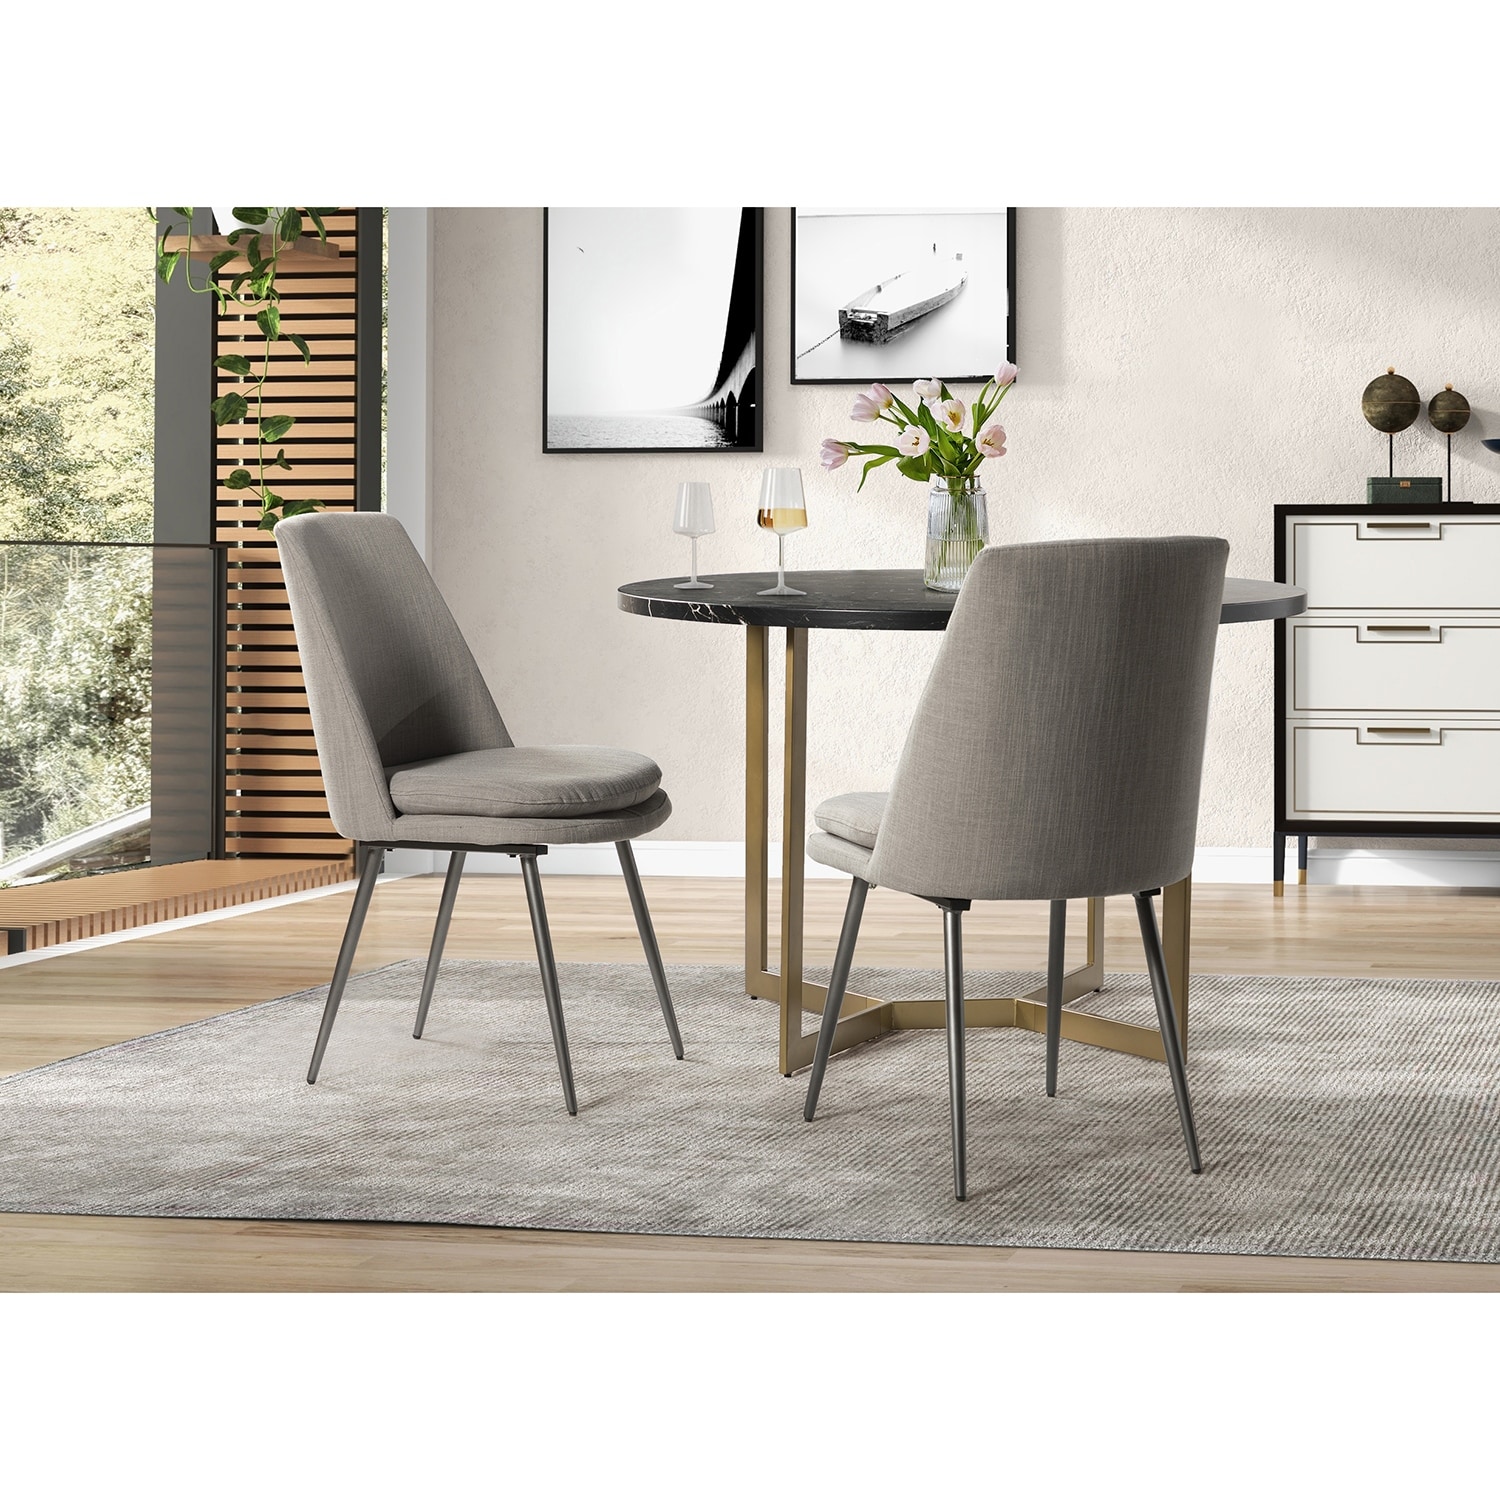 https://ak1.ostkcdn.com/images/products/is/images/direct/c74a9affb73698a602aefc040af322665b648af7/Homer-Modern-and-Contemporary-Side-Chairs-Set-of-2-with-Metal-Legs.jpg